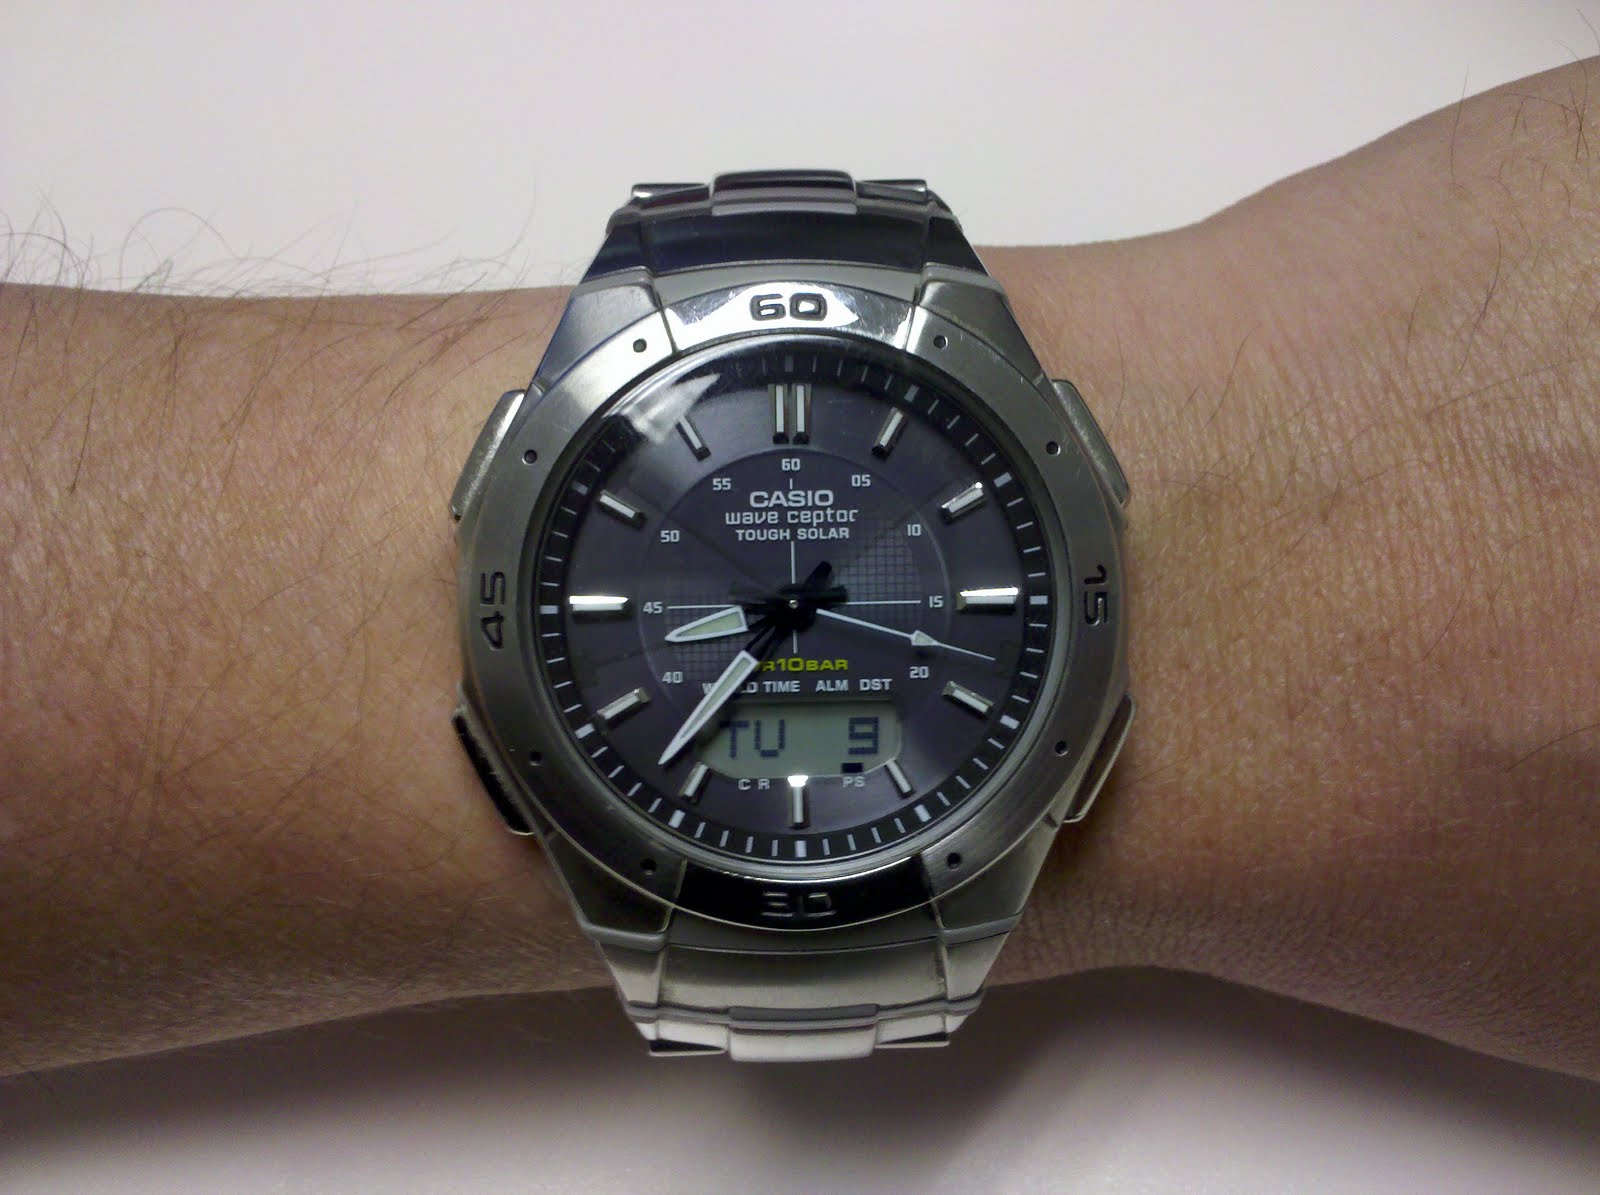 My Watch of the Day: Nov 9, 2010 Stainless Steel Strap Week Watch #2